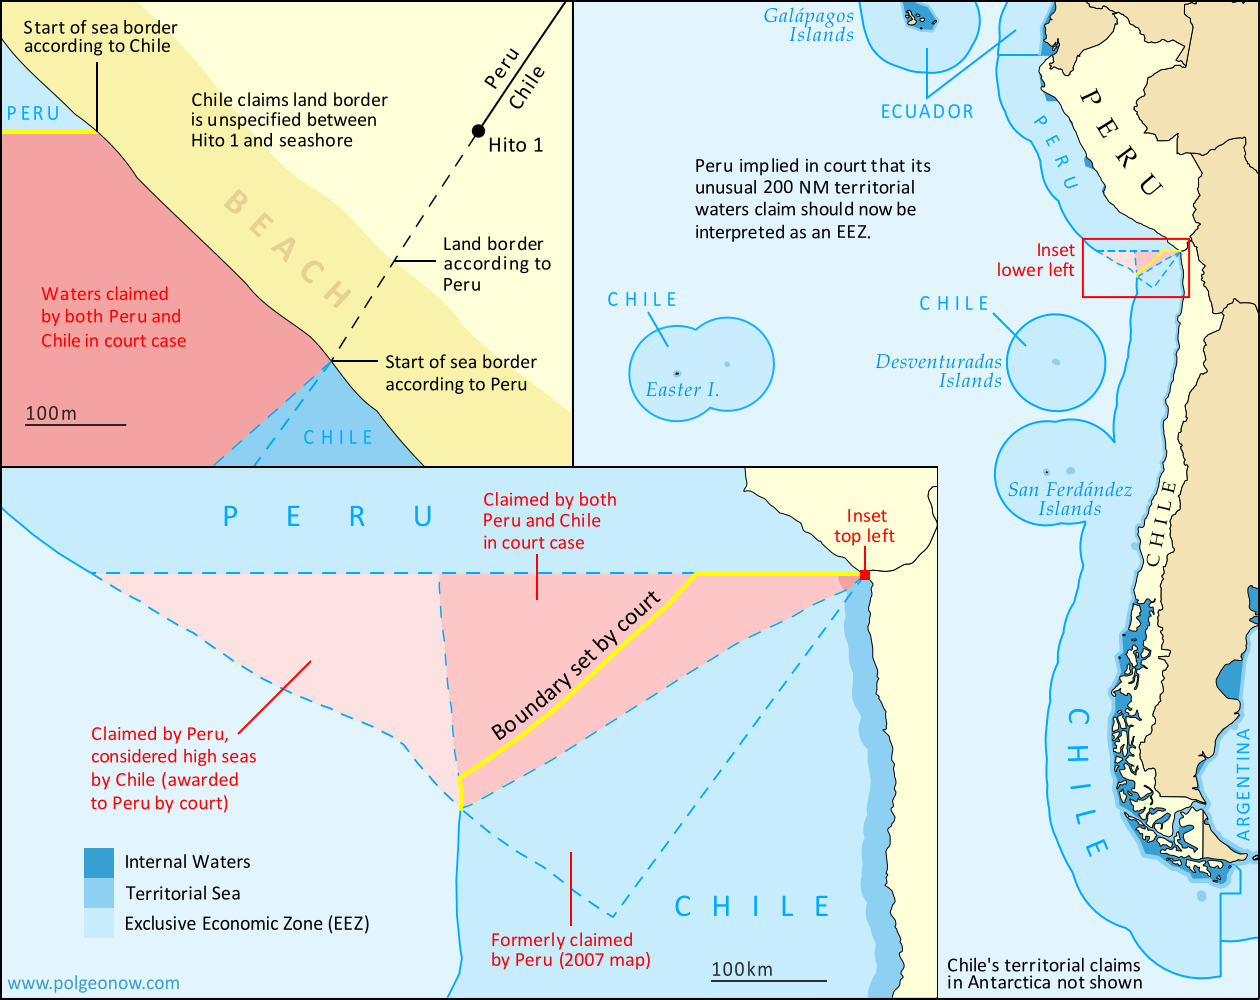 Map of Chile and Peru's territorial waters and exclusive economic zones (EEZ), plus the details of their territorial dispute at sea and disagreement of the land border. Shows the results of the Jan. 27, 2014 ruling by the International Court of Justice (ICJ) settling the dispute.